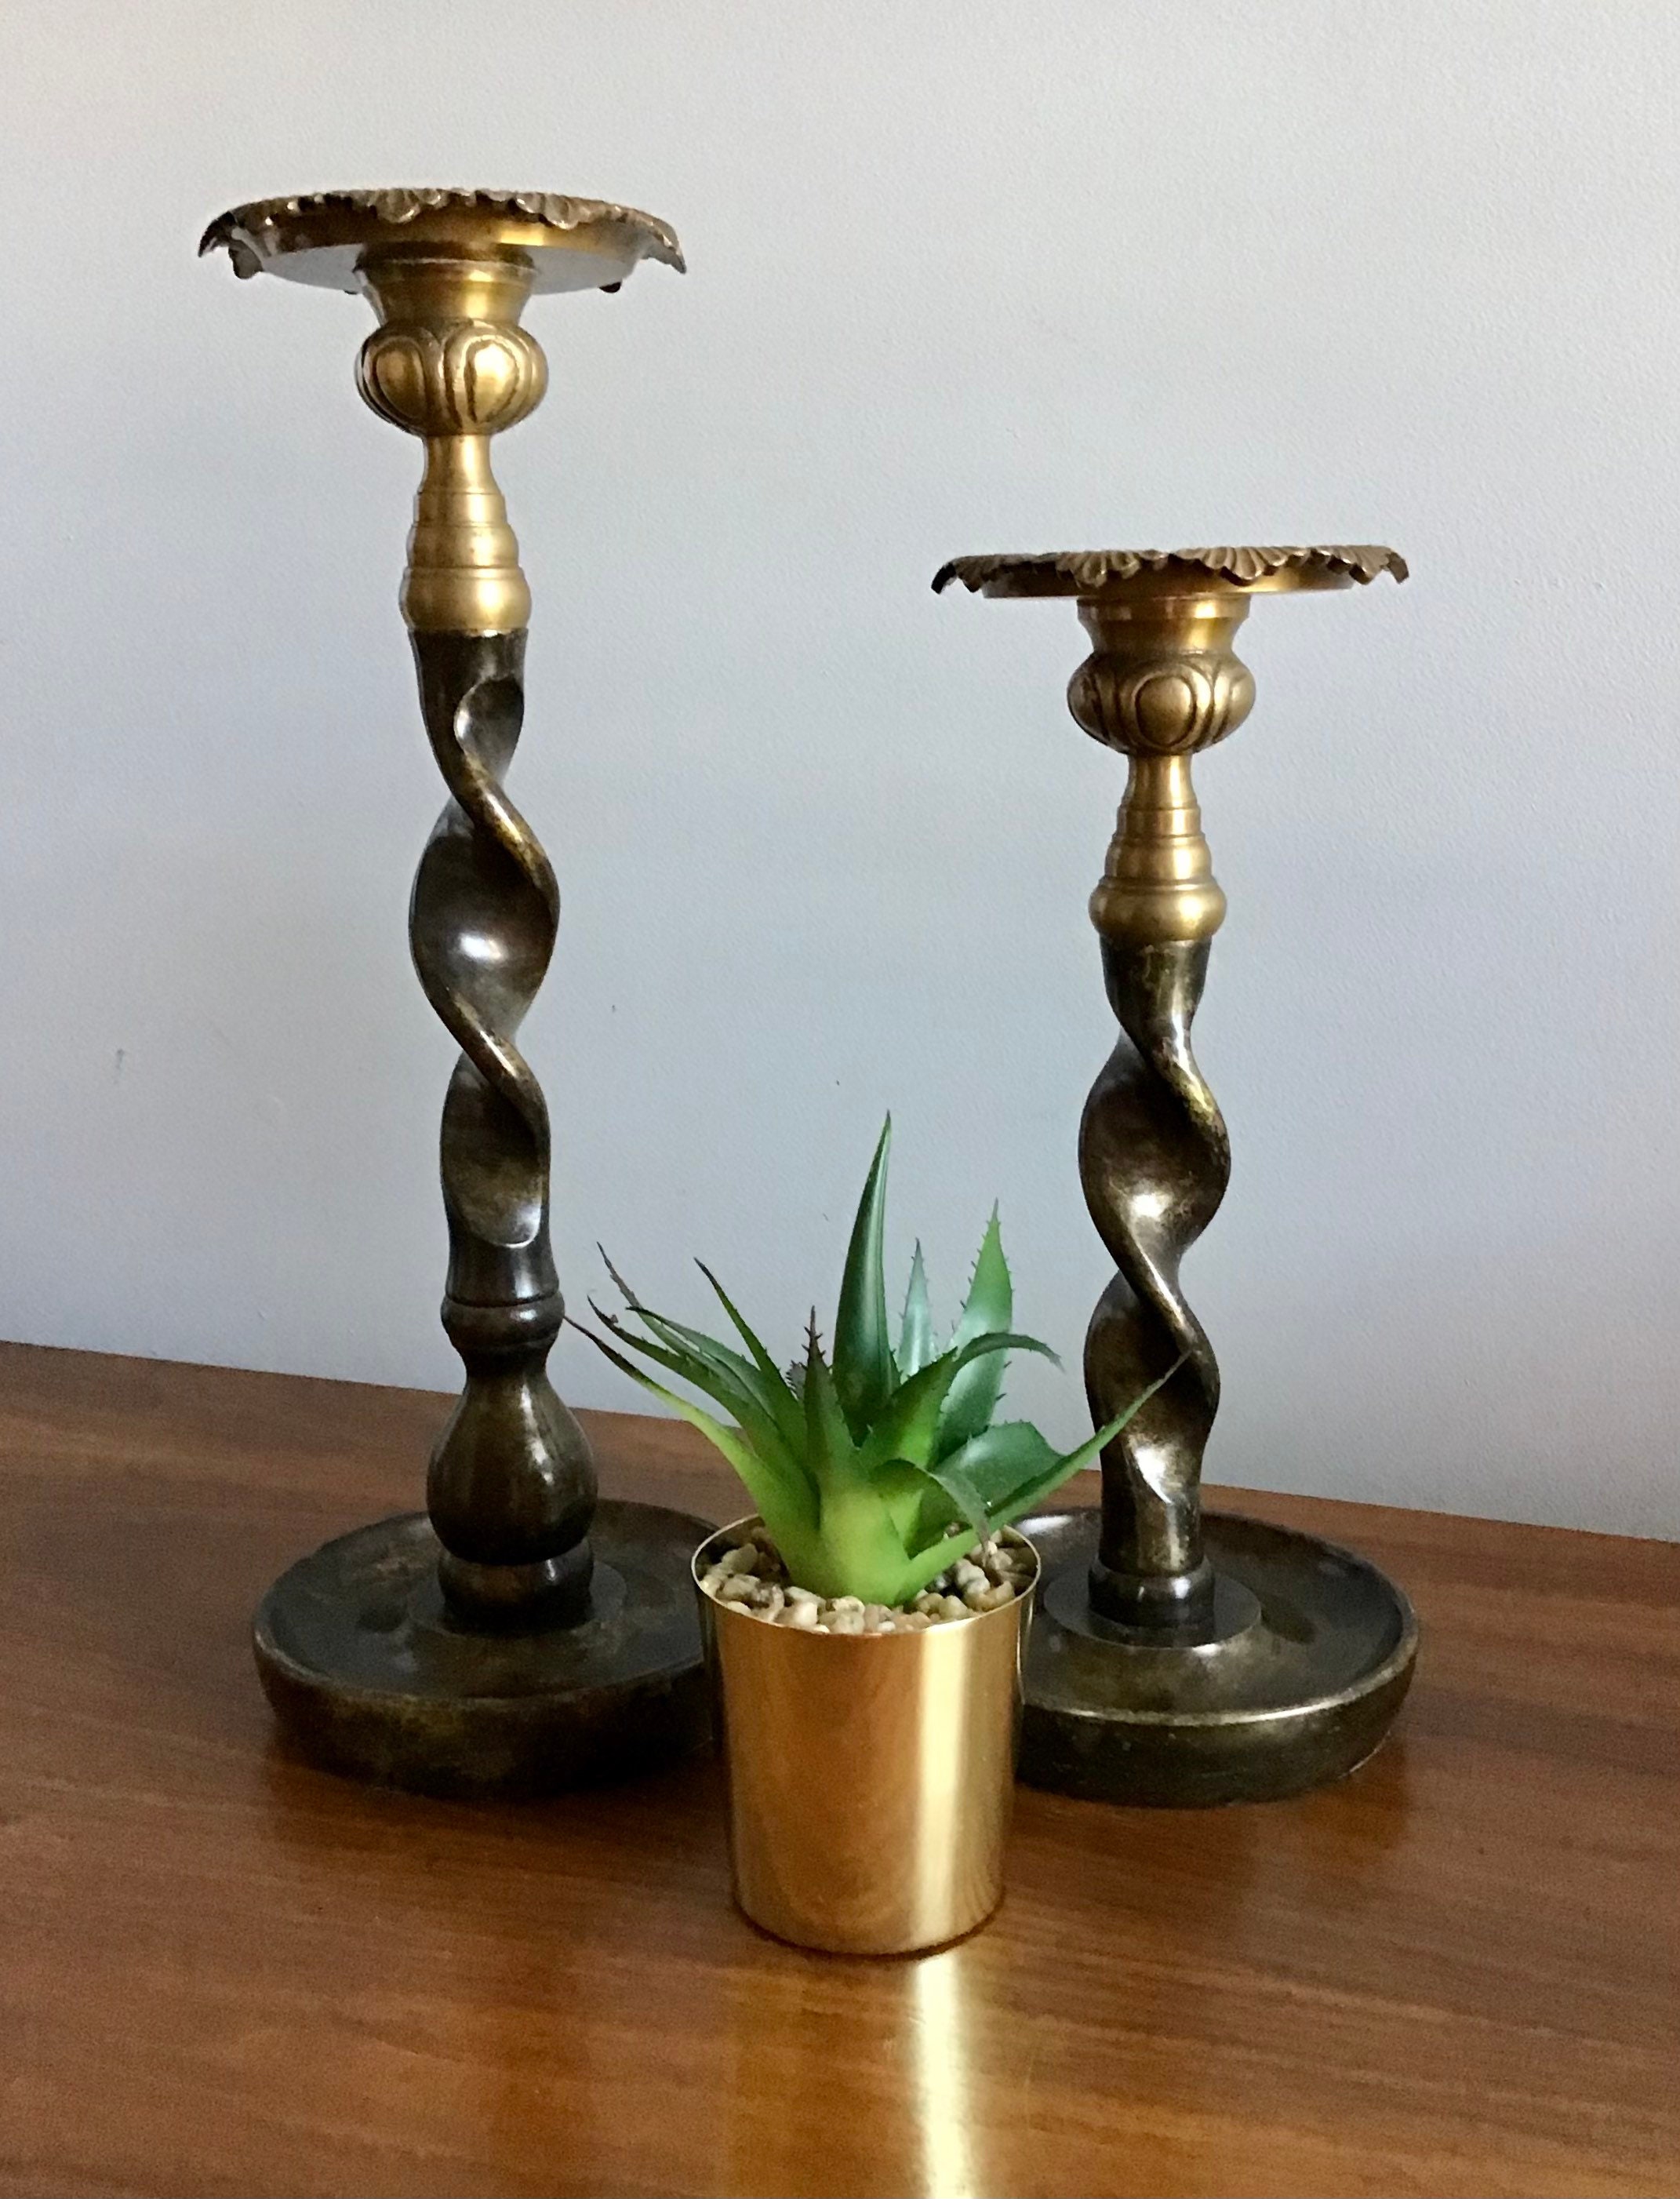 Double Twist Brass Barley Candle Sticks Candleholders 1950s - Ruby